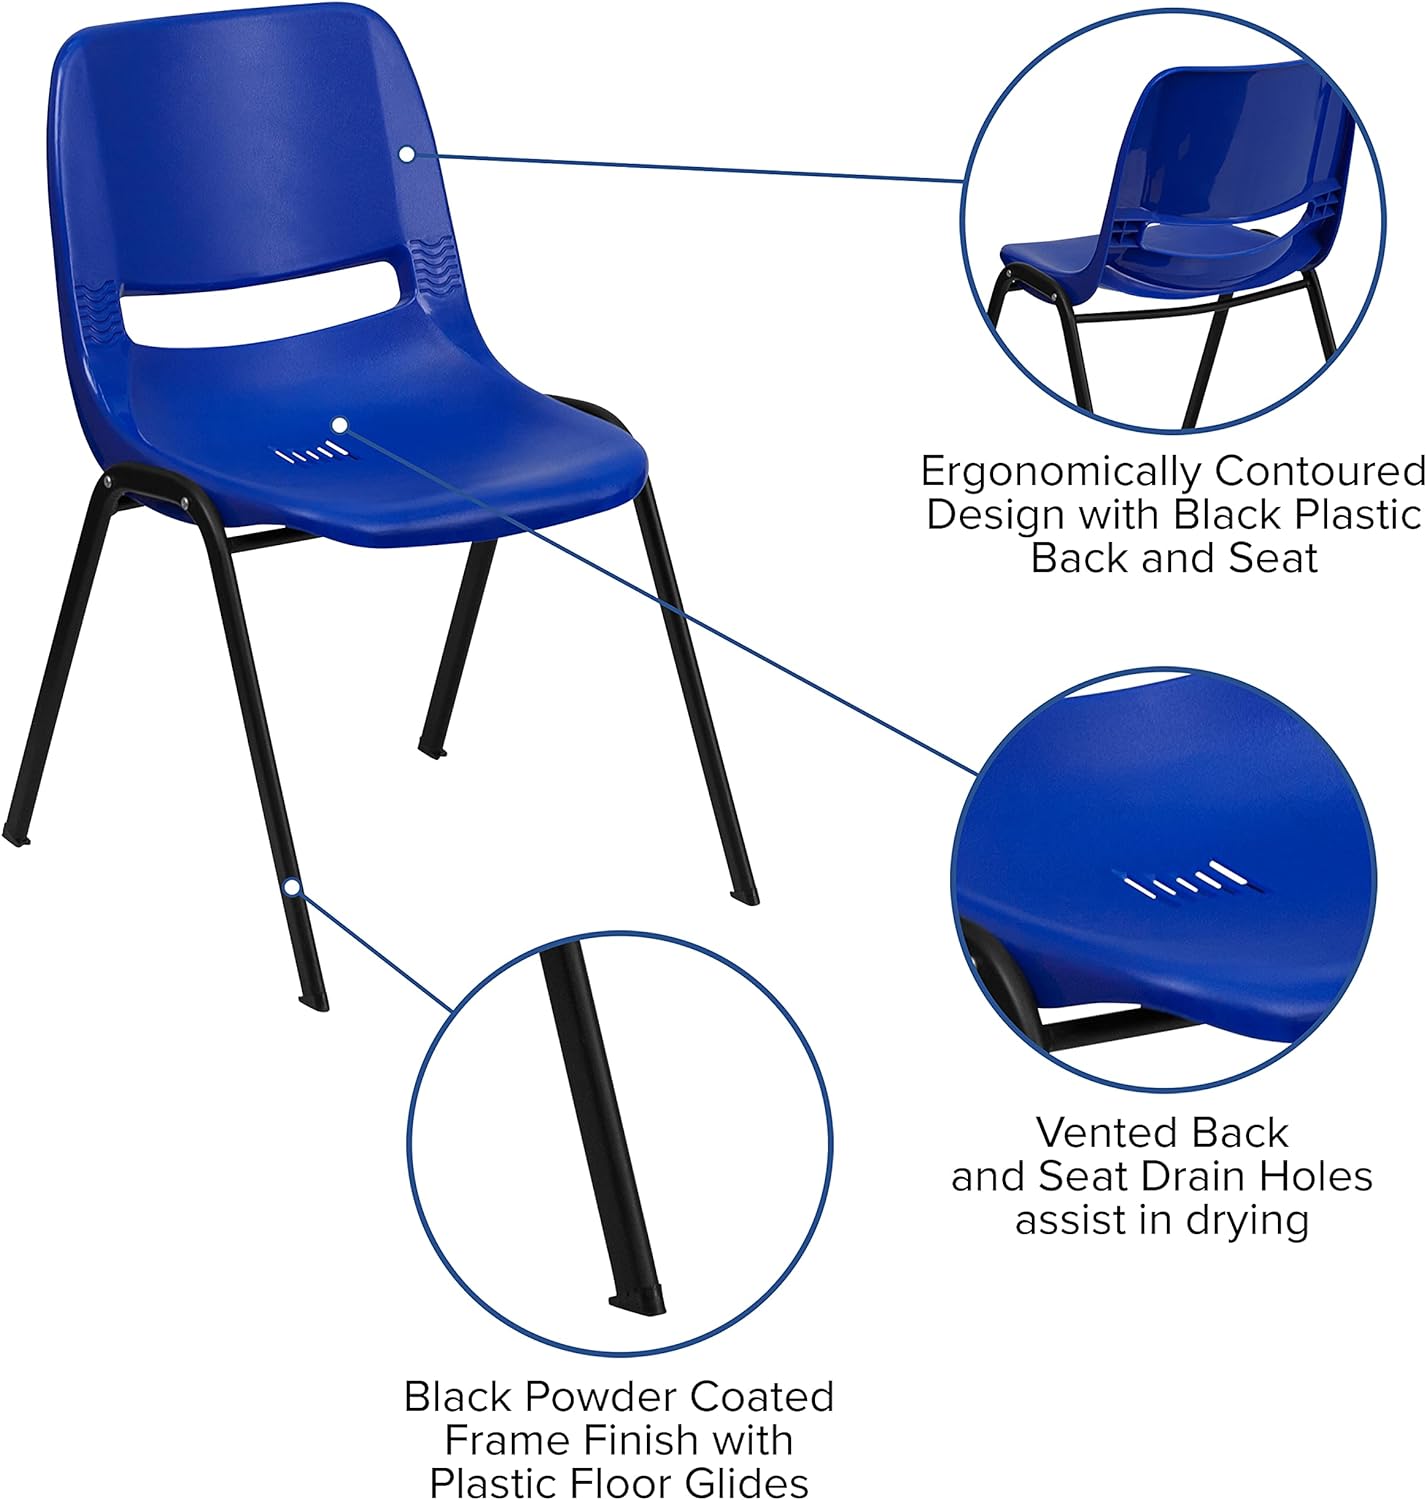 Flash Furniture Lot of 16 440 LB. CAPACITY PRESCHOOL NAVY STACK CHAIRS AND 12'' SEAT HEIGHT